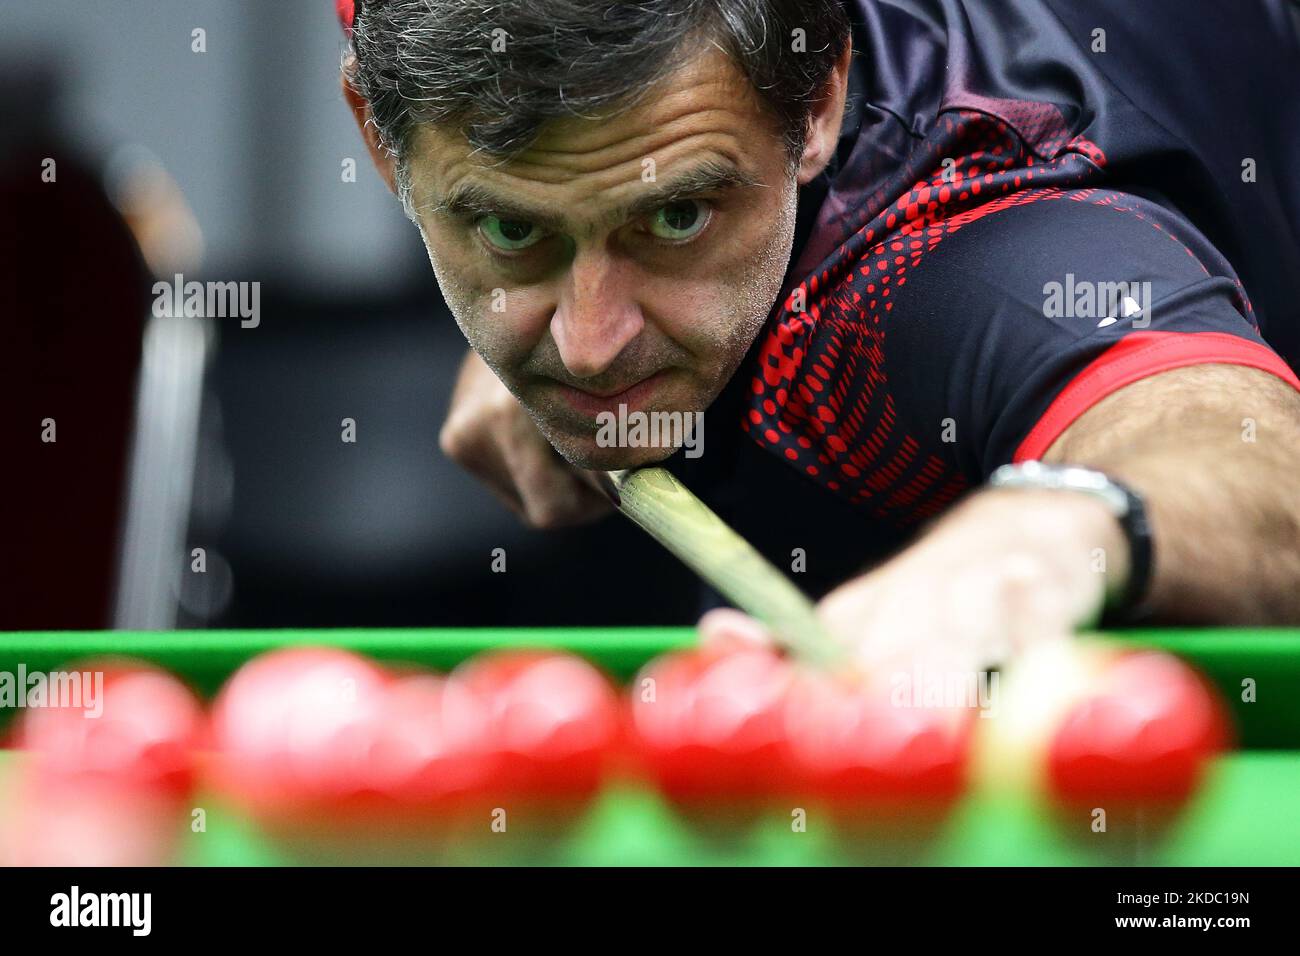 English professional snooker player and current World No.1 and seven-time world champion, Ronnie OSullivan in action during a practise demonstration at the Ronnie OSullivan Snooker Academy on June 13, 2022 in Singapore.